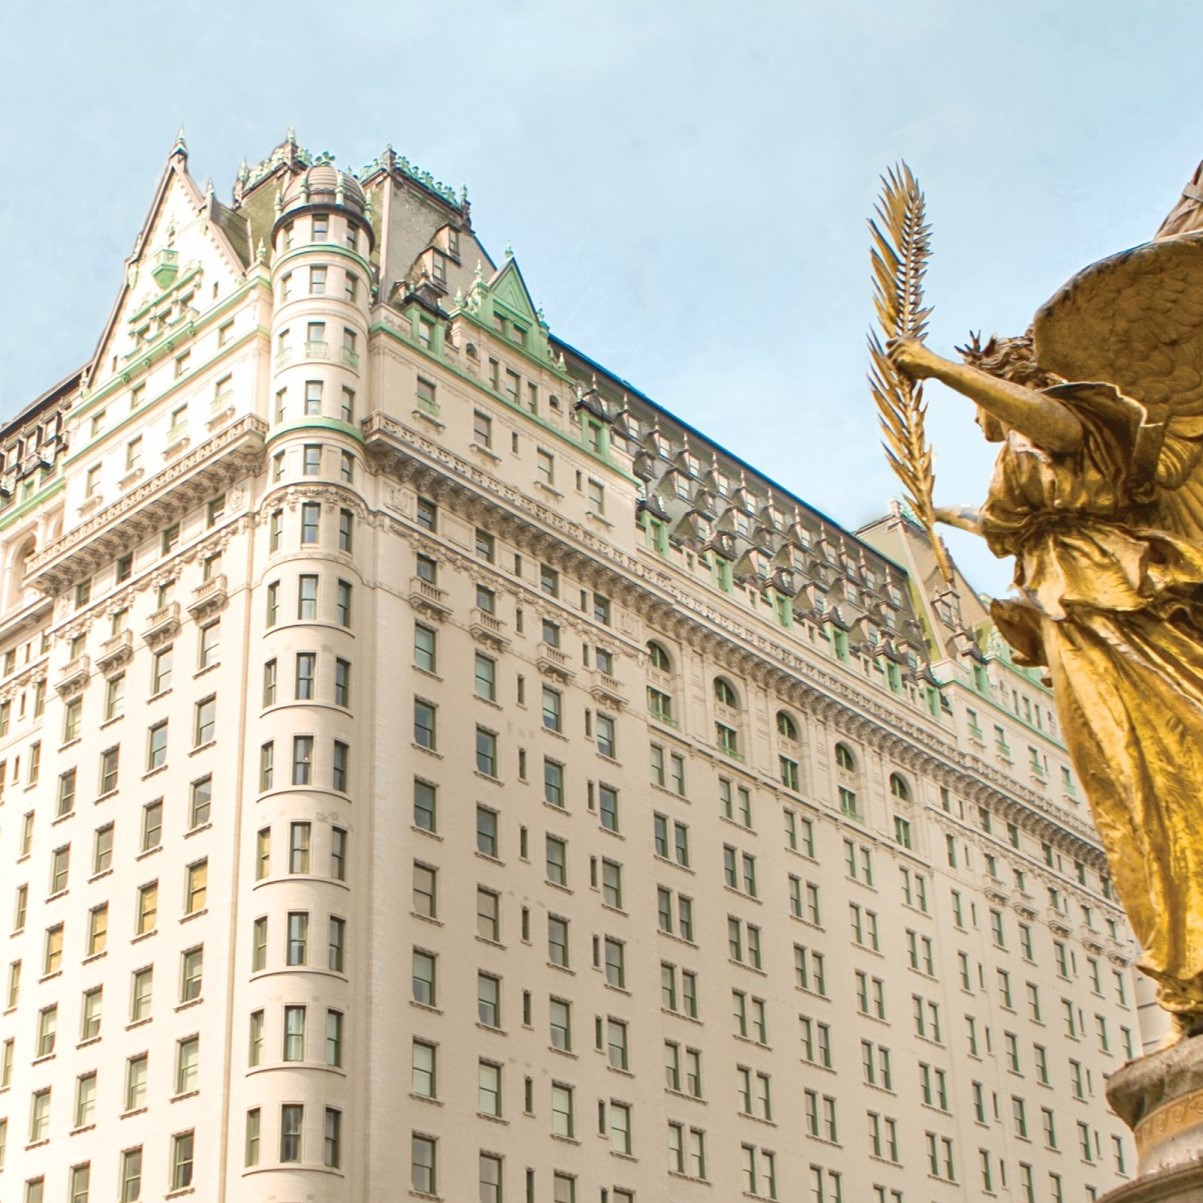 Credit: Historic Hotels of America and The Plaza